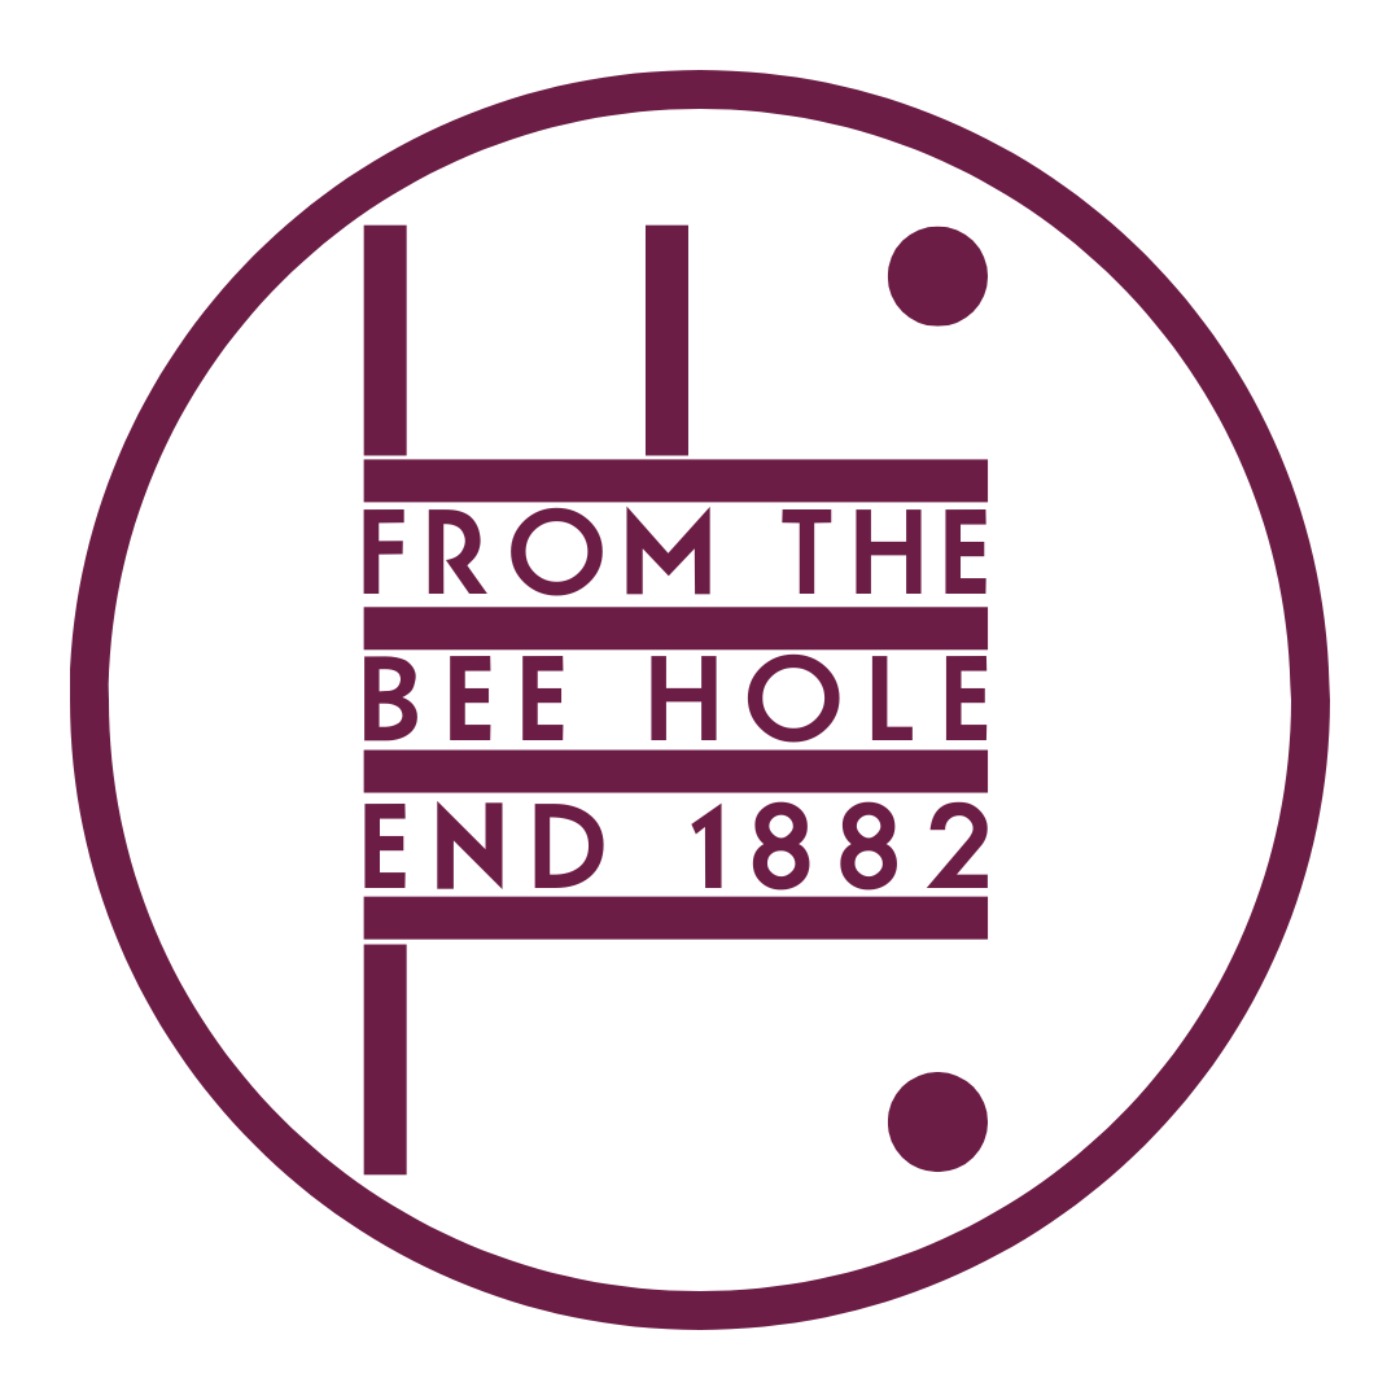 From the Bee Hole End - The Debrief - Sheffield United